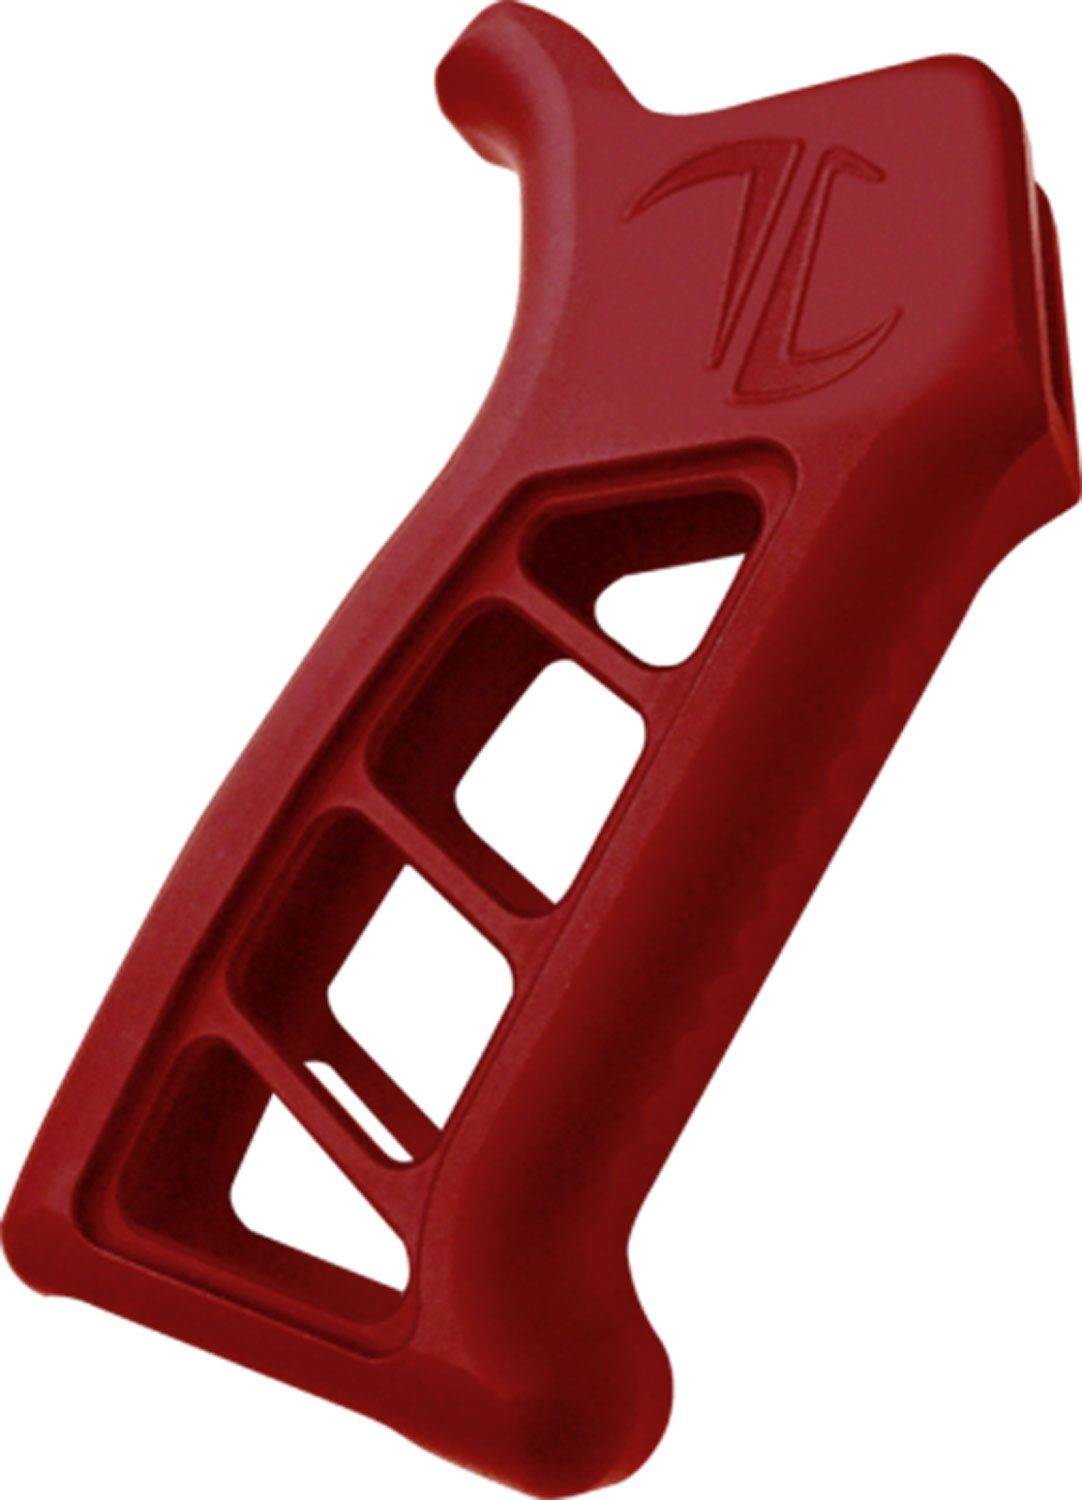 TIMBER CREEK OUTDOOR INC EARPGR Enforcer AR Pistol Grip Red Anodized with Clear Cerakote Aluminum